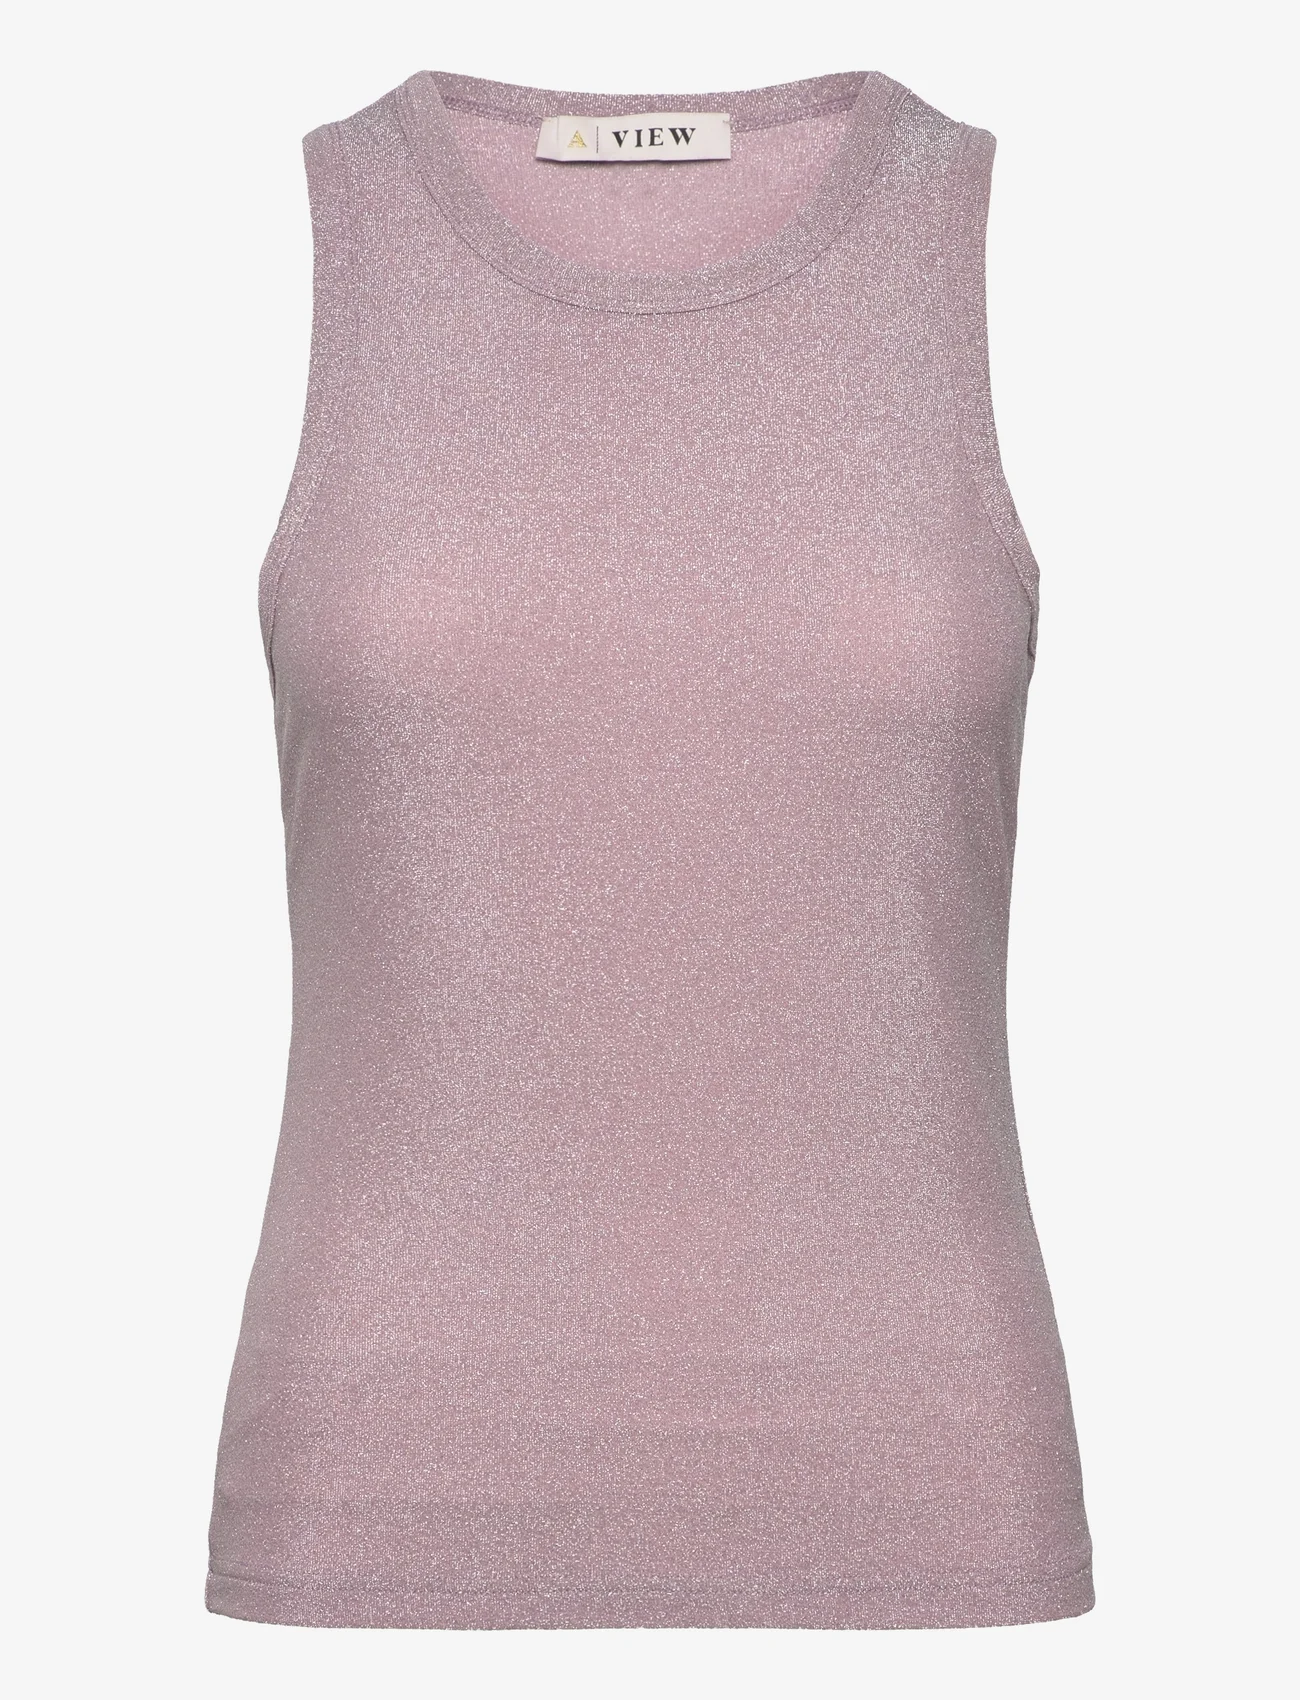 A-View - Eva tank top - lowest prices - rose - 0